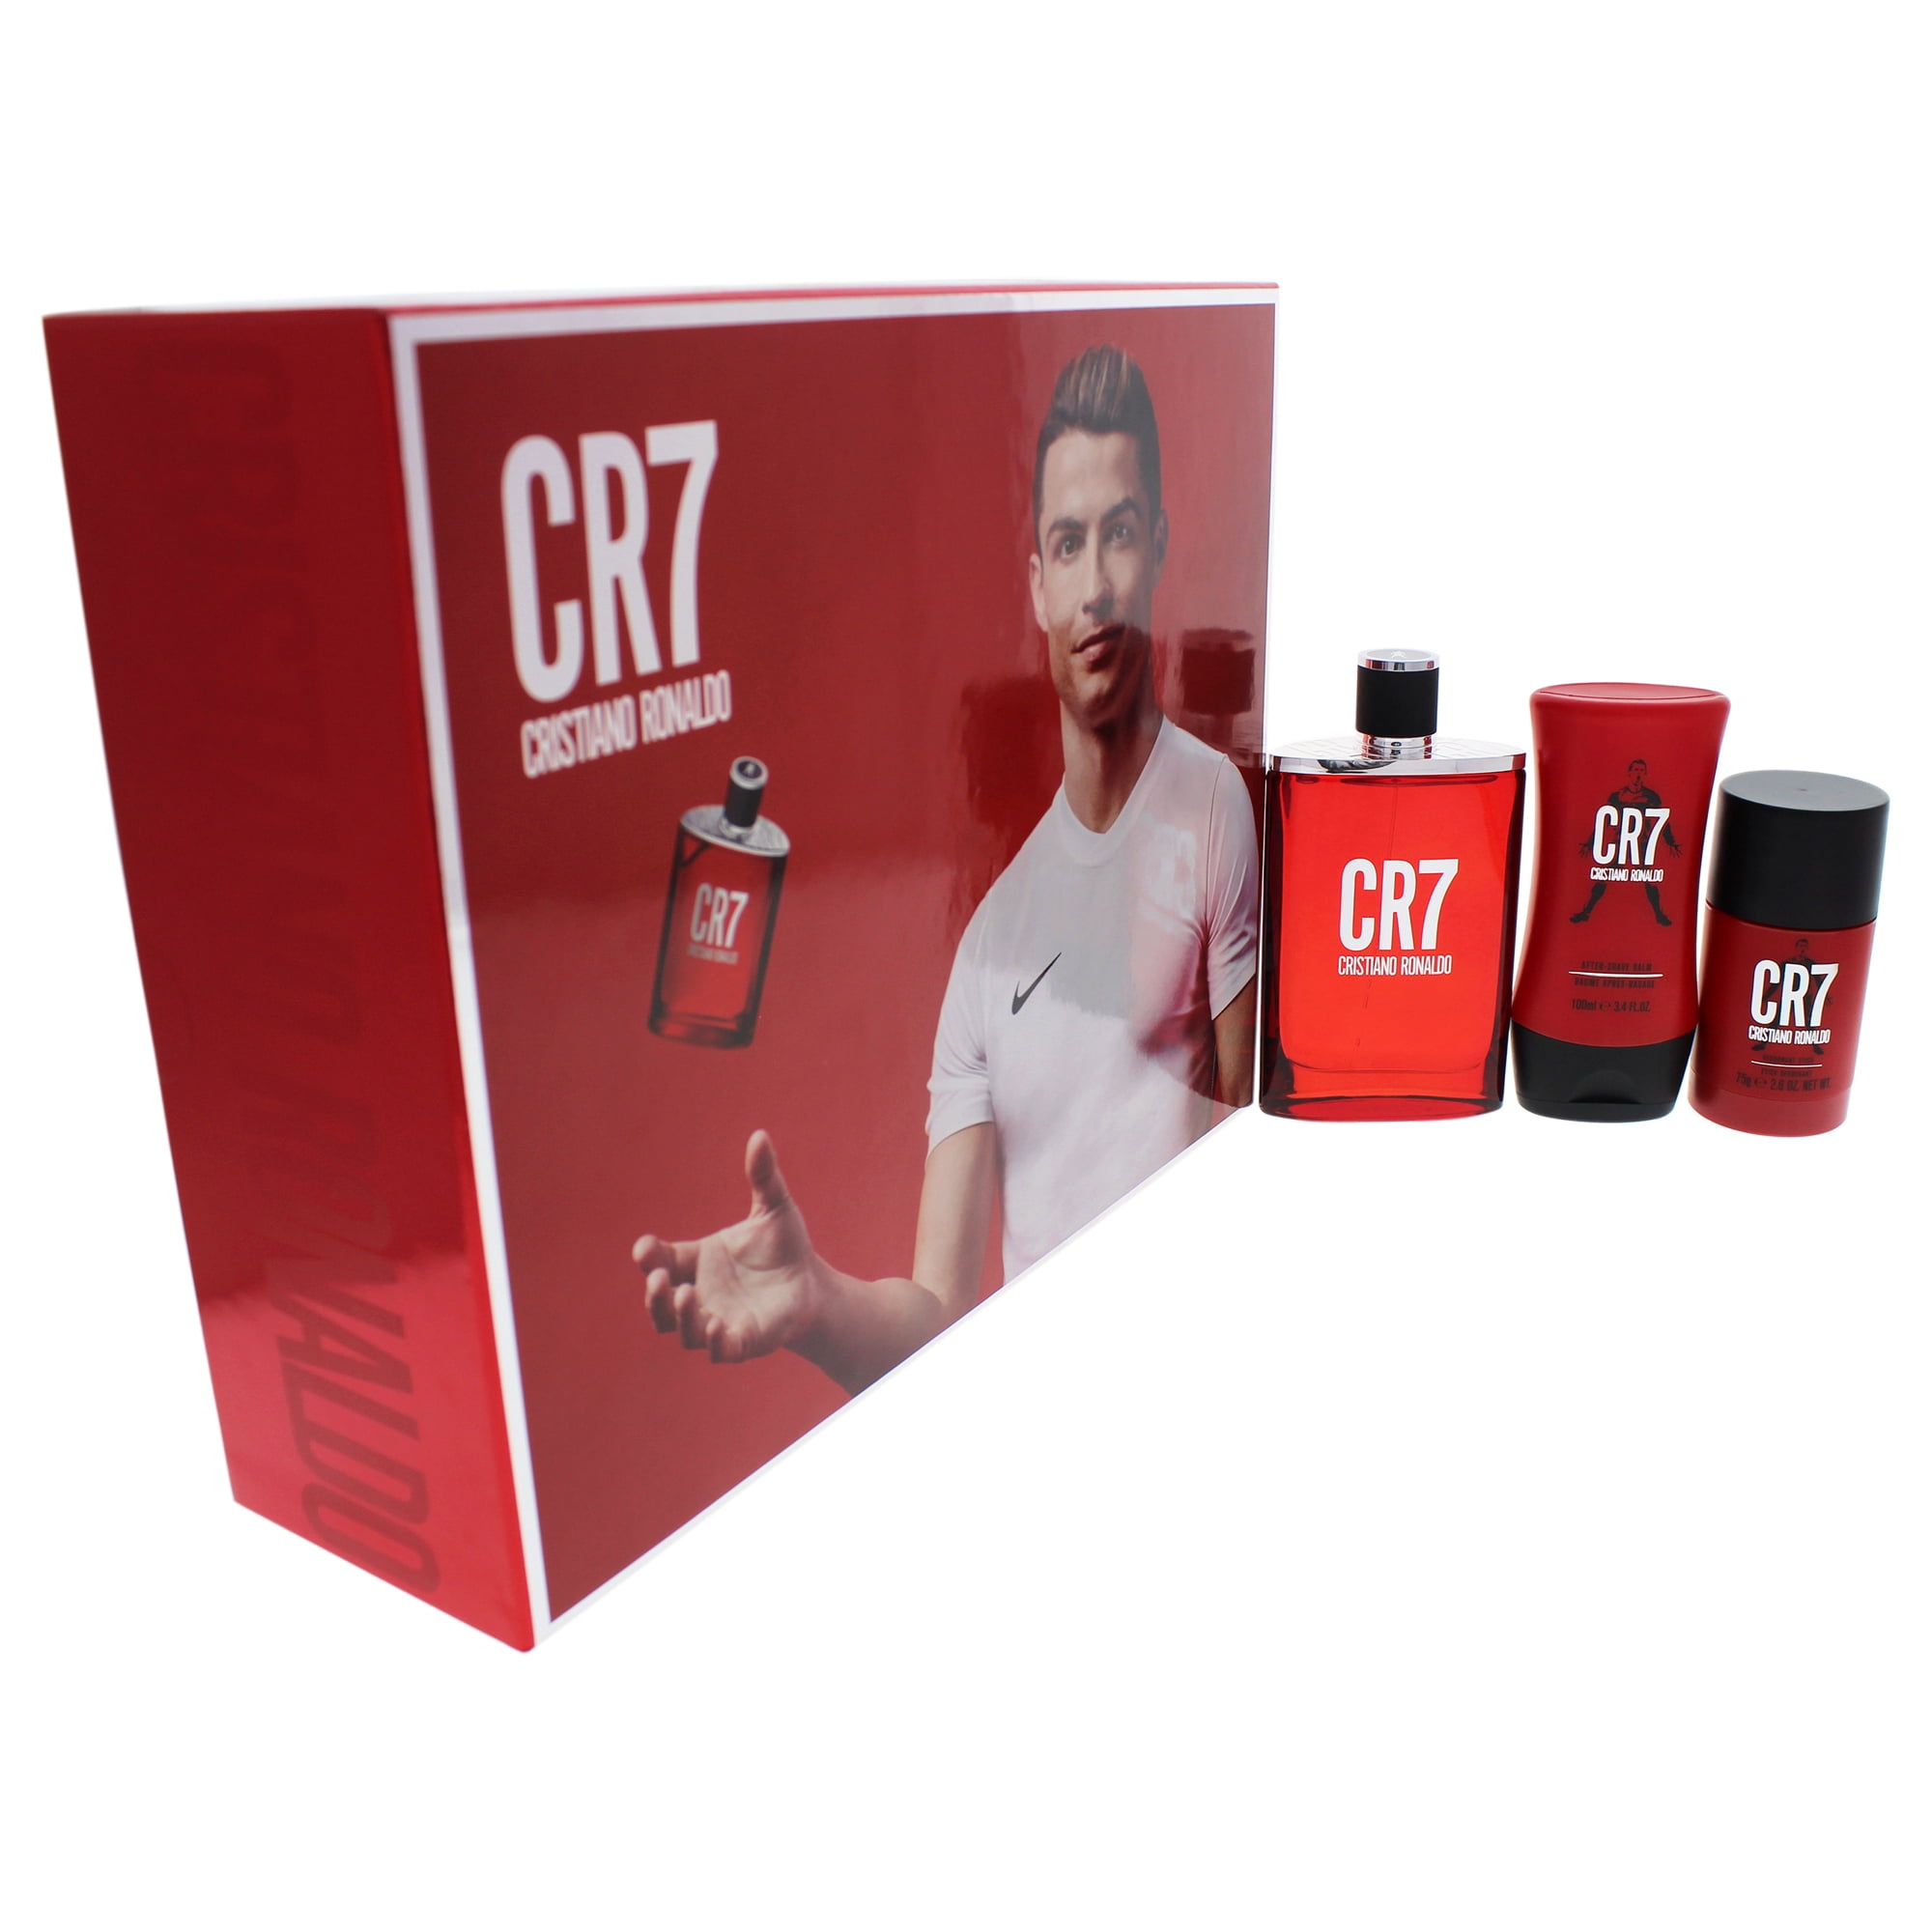 CR7 by Cristiano Ronaldo for Men - 3 Pc Gift Set  EDT Spray,   Deodorant Stick,  After | Walmart Canada